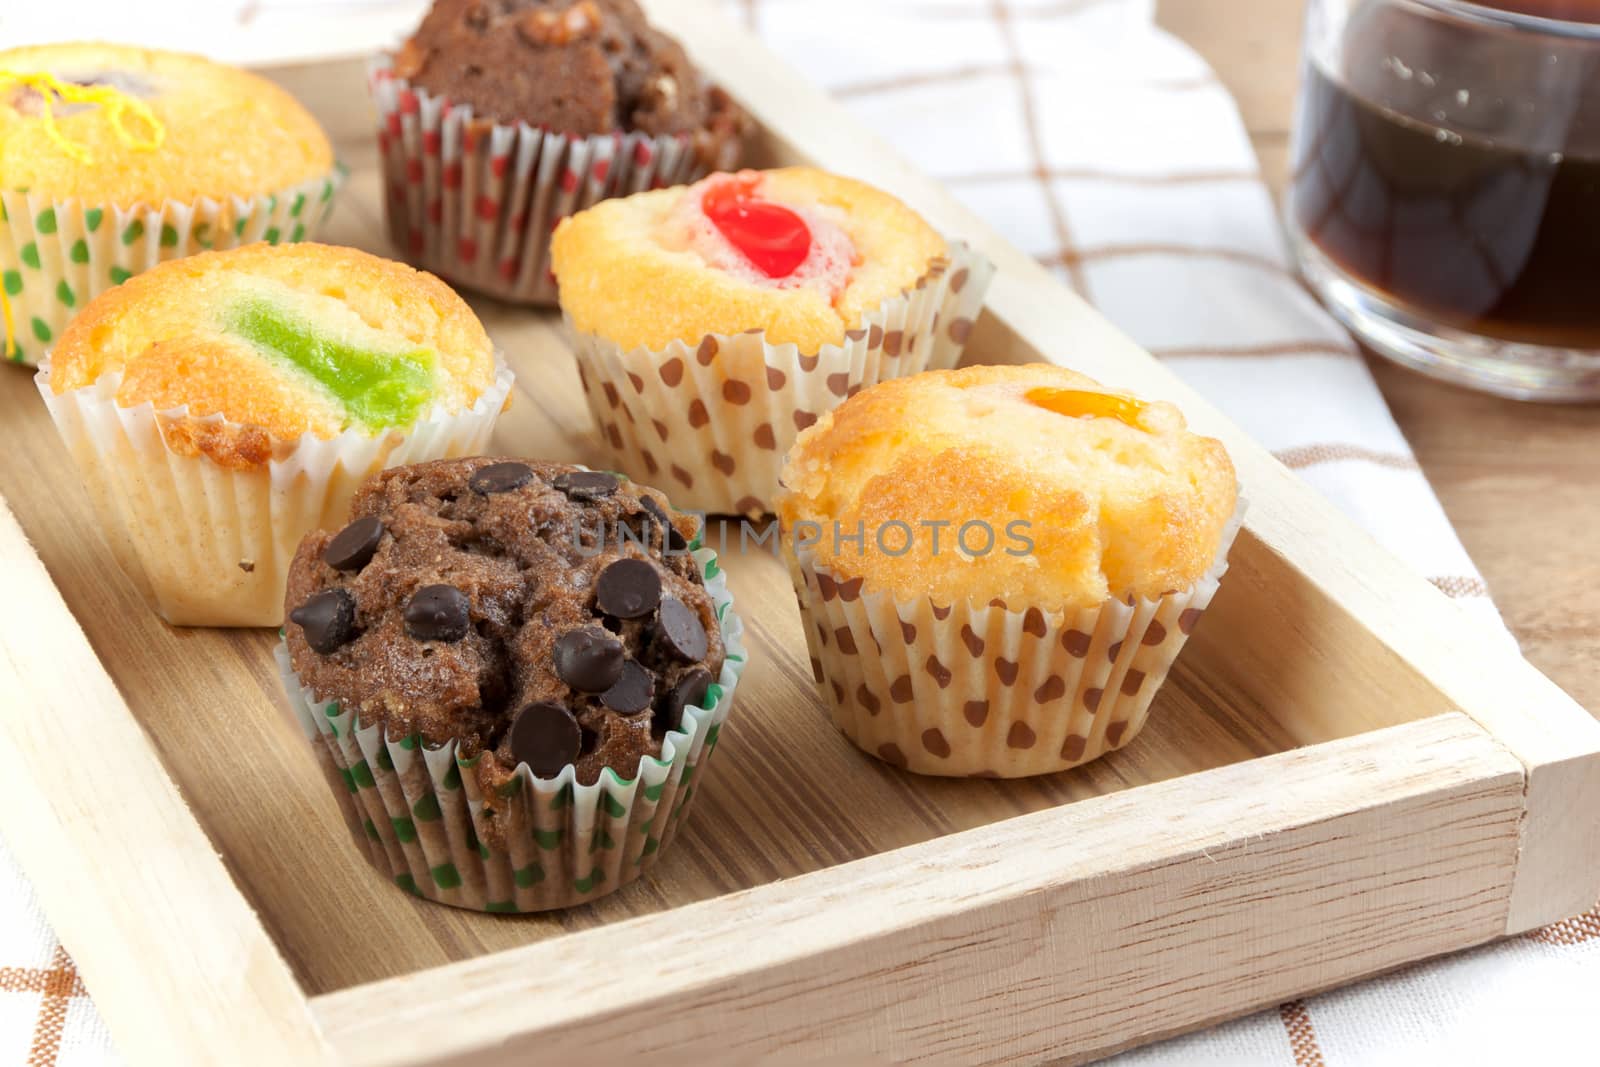 Cupcake various flavors in wood tray on wood table.